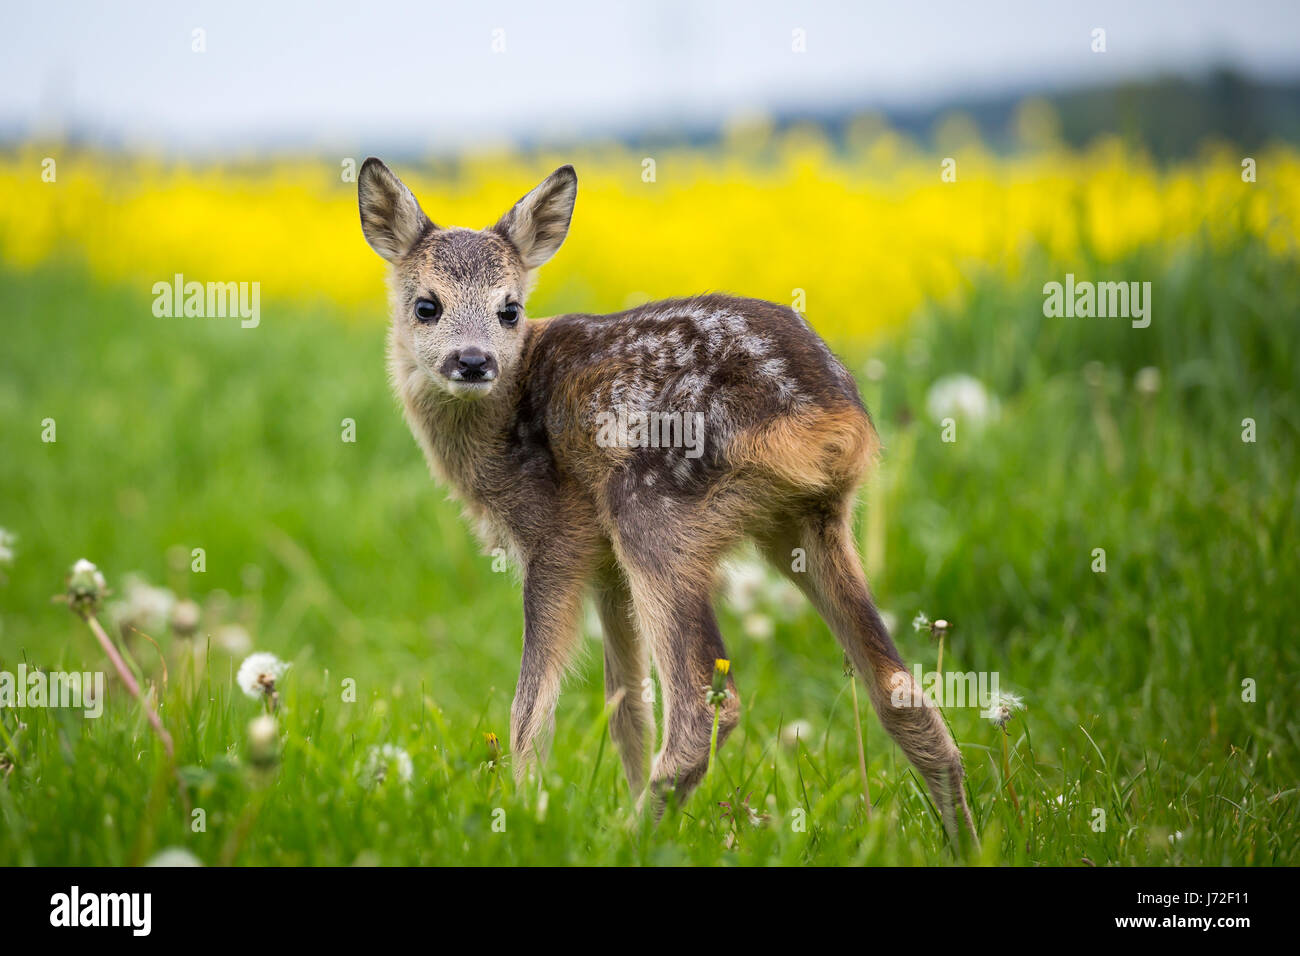 Young wild roe deer in grass, Capreolus capreolus. New born roe deer, wild spring nature. Stock Photo